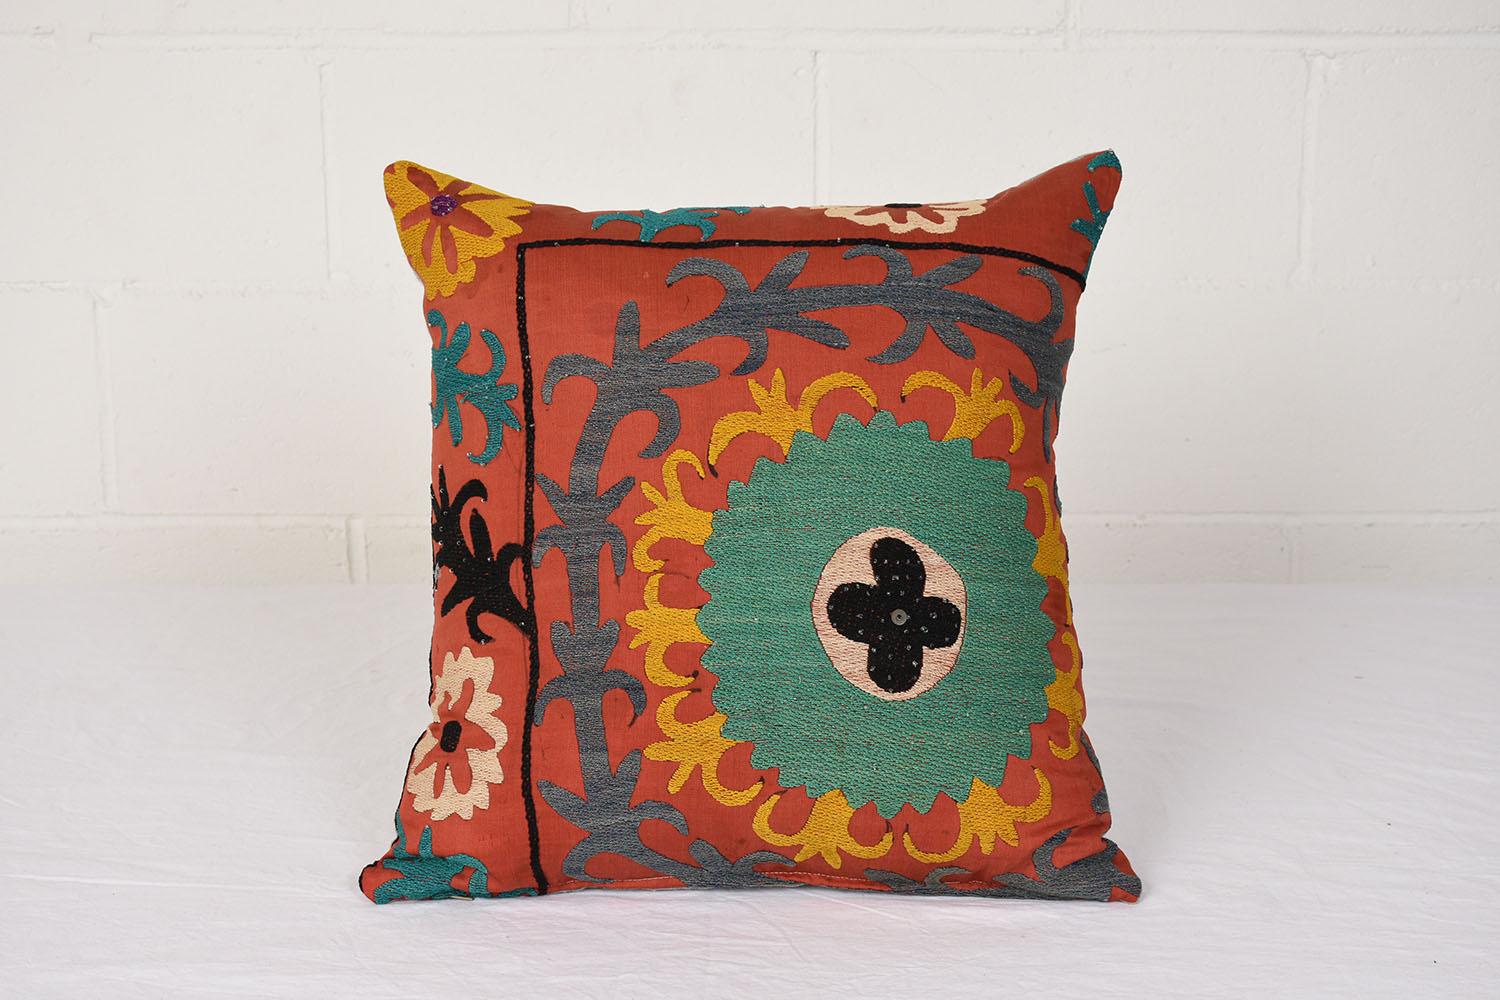 Pair of textile pillows with a colorful design and beaded details.